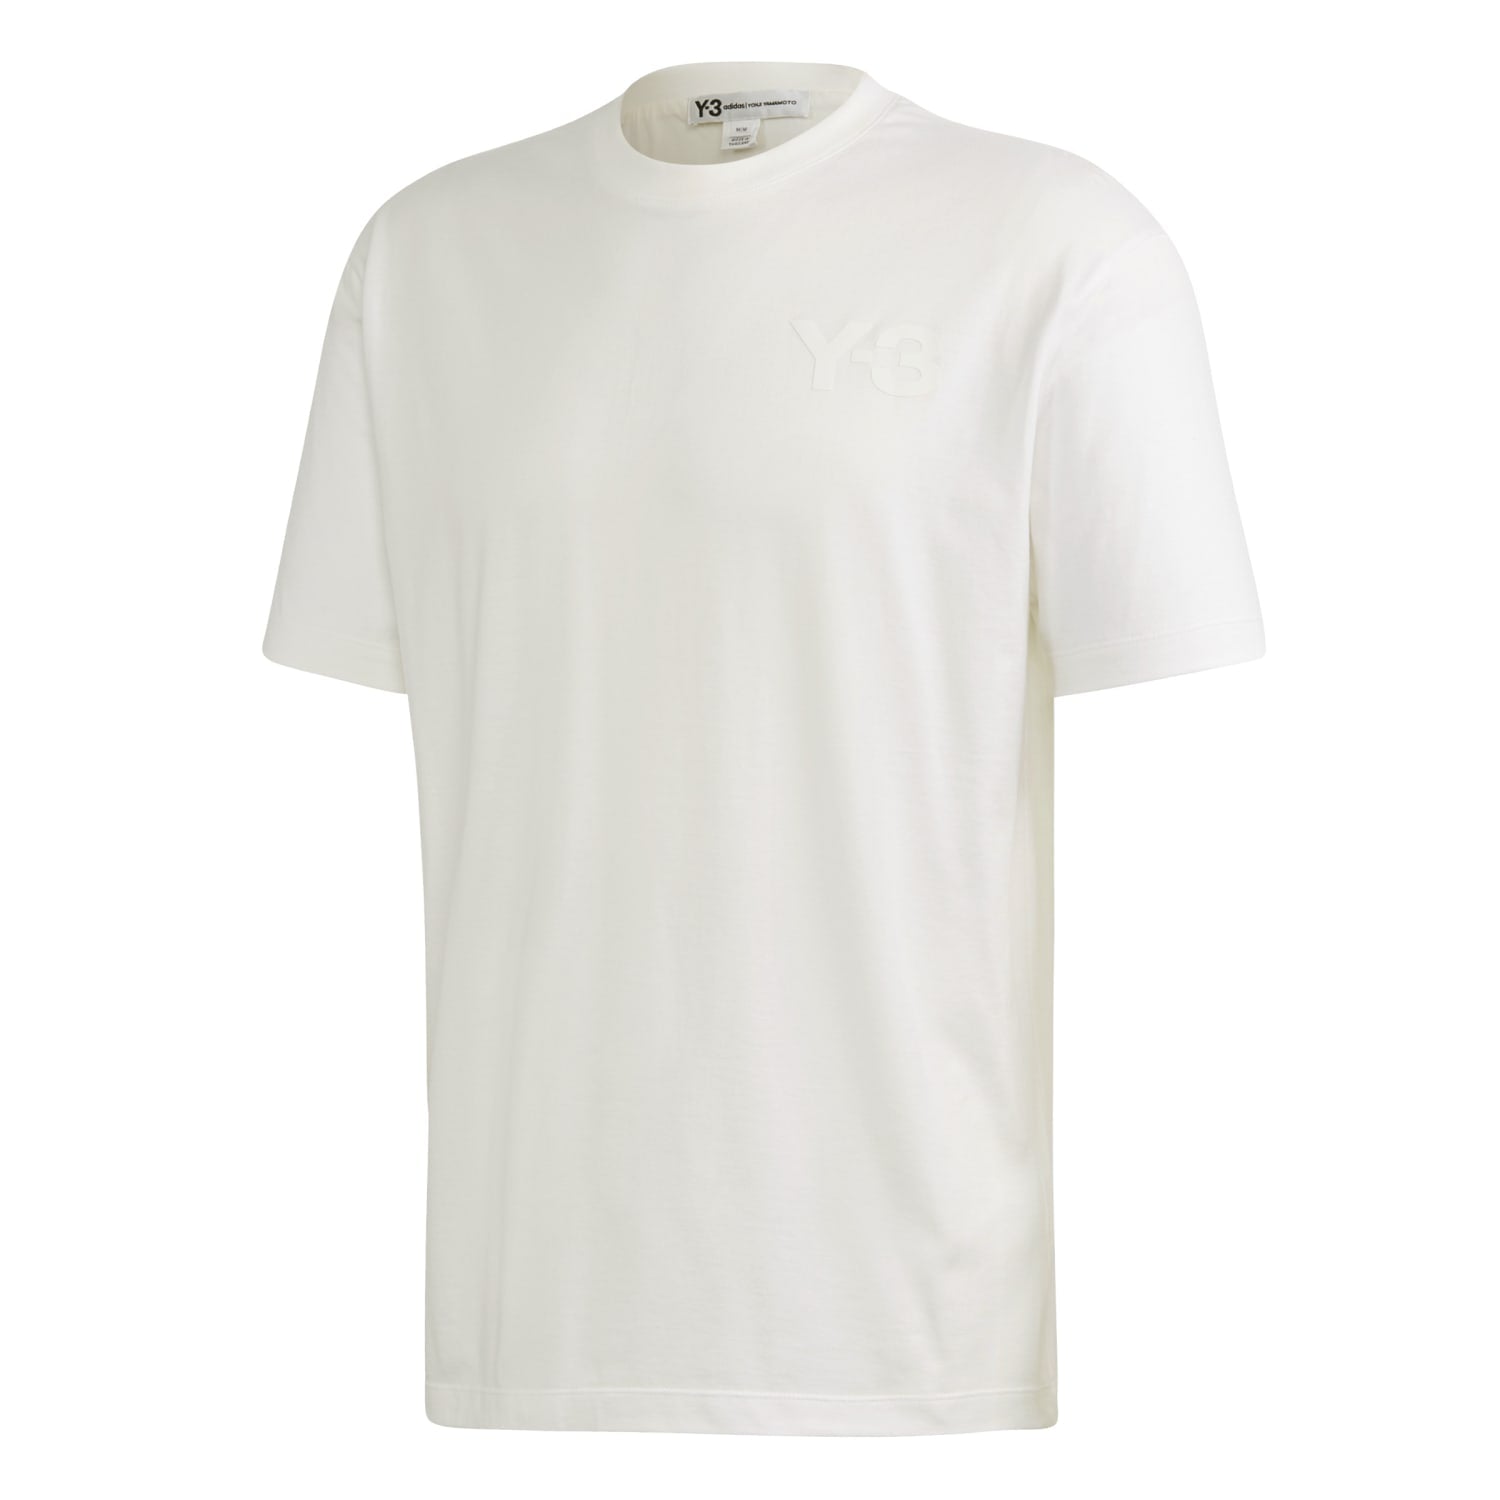 adidas men y 3 cl ss tee white fn3359 146